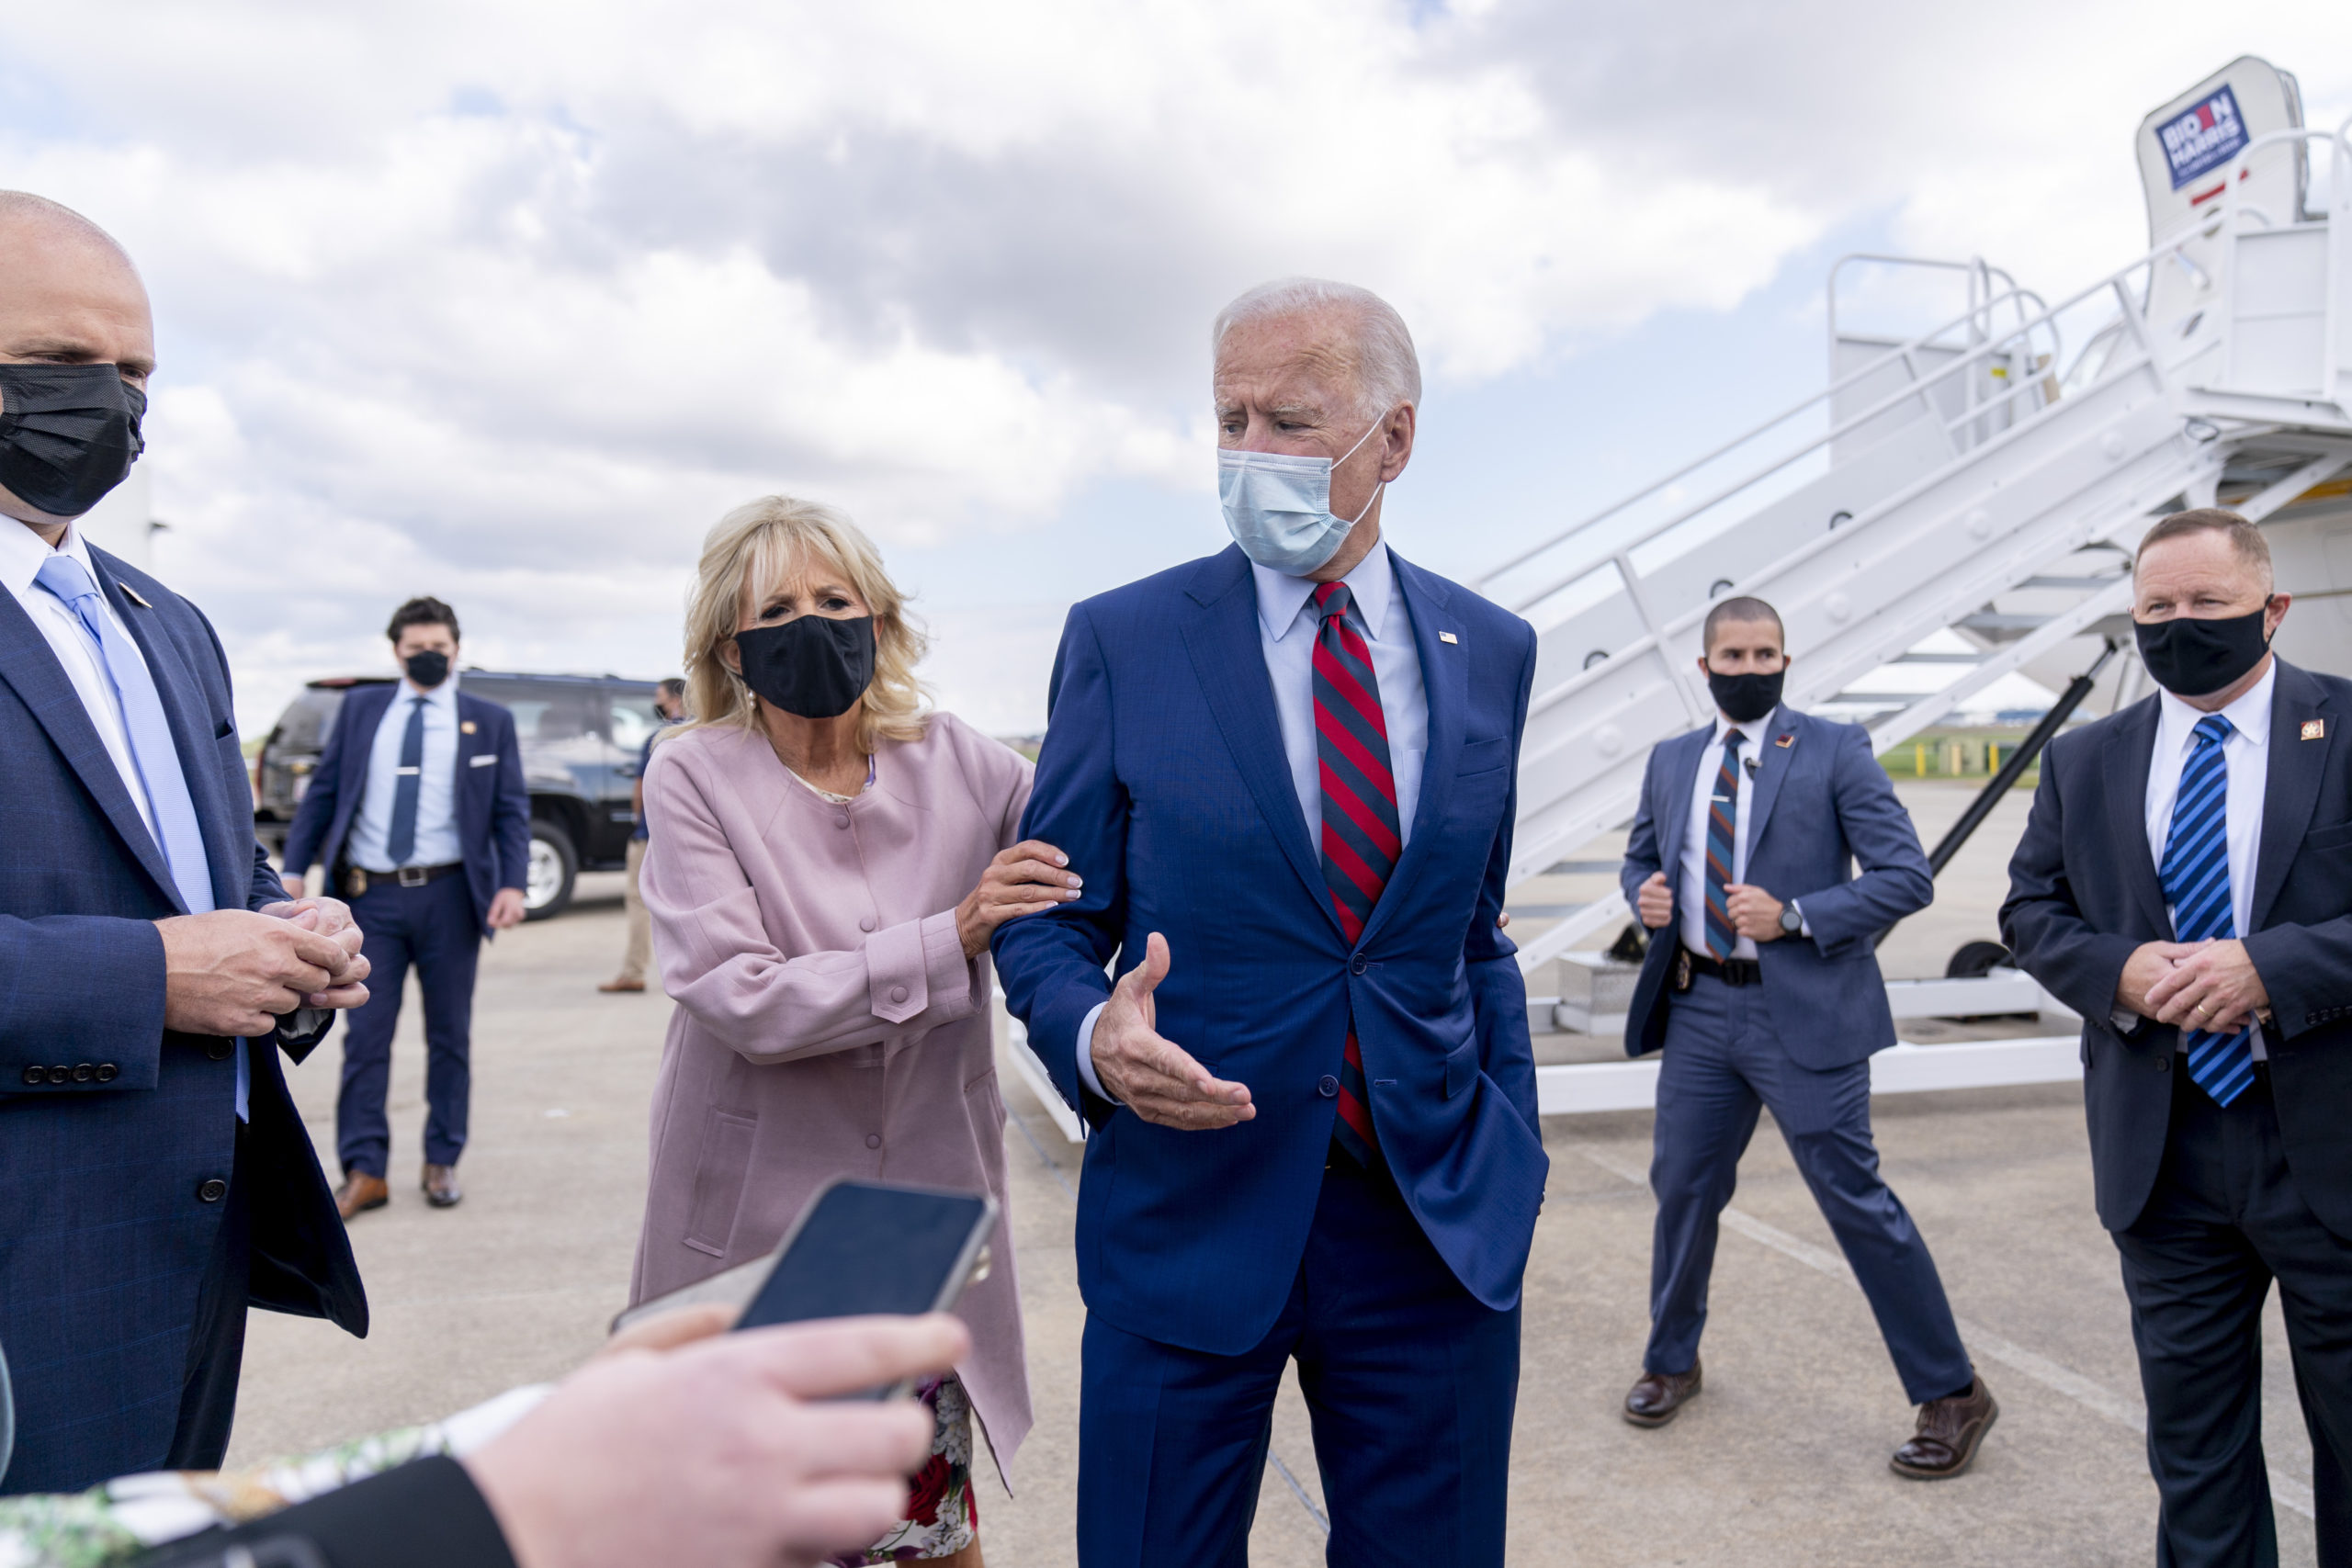 Chatting the Pictures — Jill Biden: I’ve Got a Hold On You